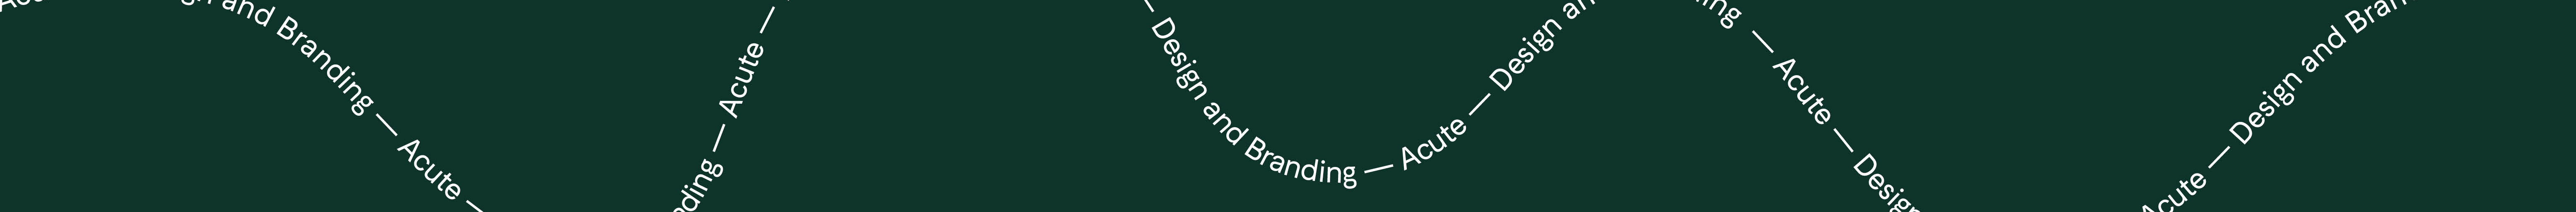 Acute Design and Branding's profile banner